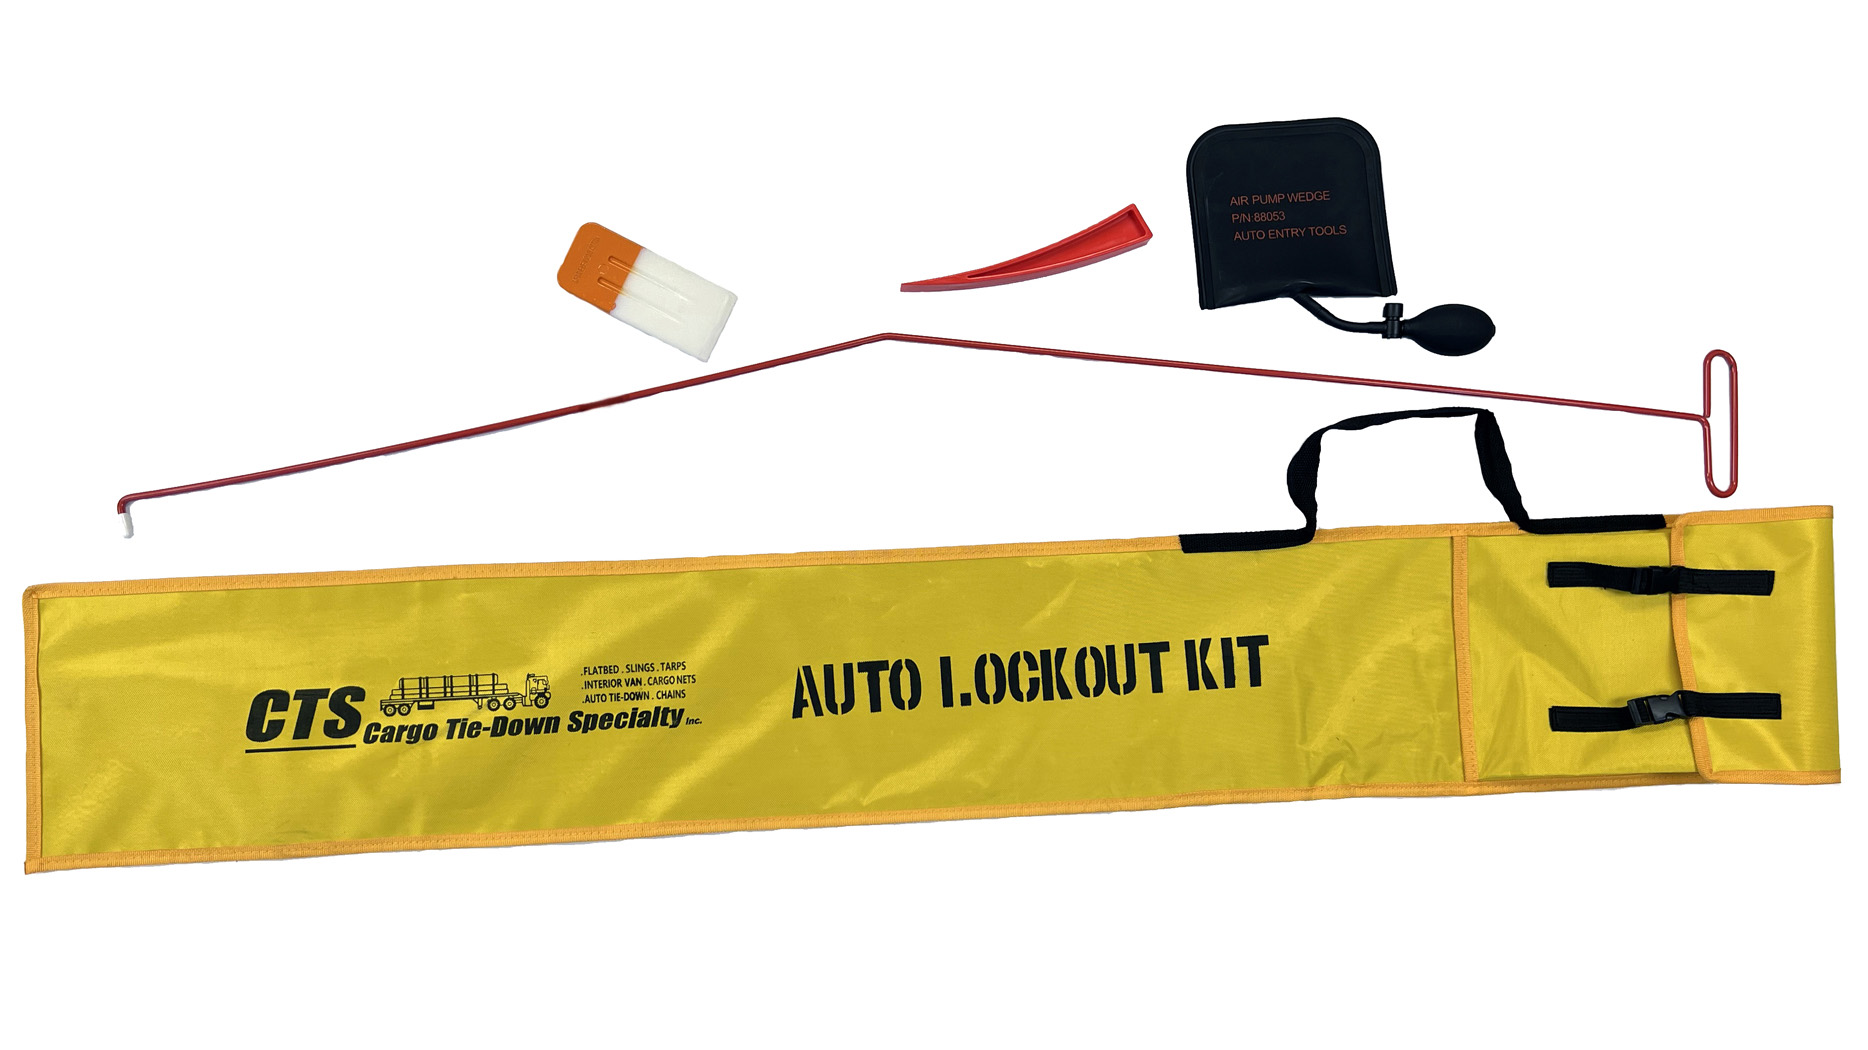 Automotive lockout kit - Long reach tool (Review) (479) 